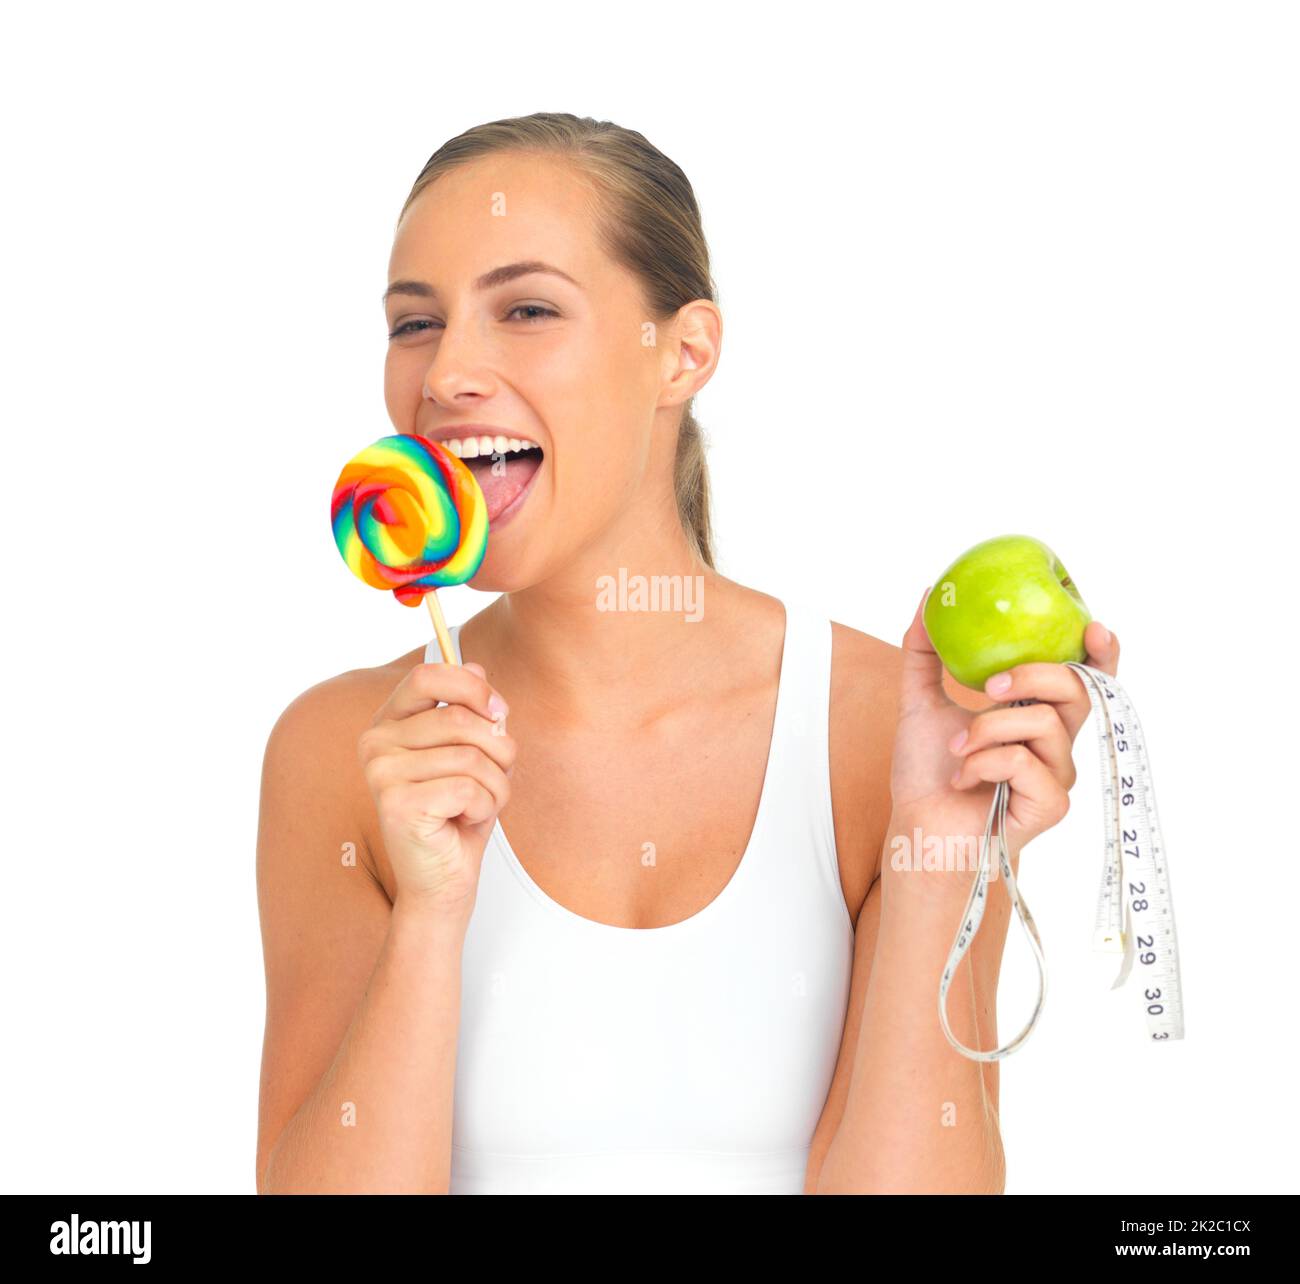 I thought Id reward myself.... Portrait of a sporty young woman licking a lollipop while holding an apple. Stock Photo